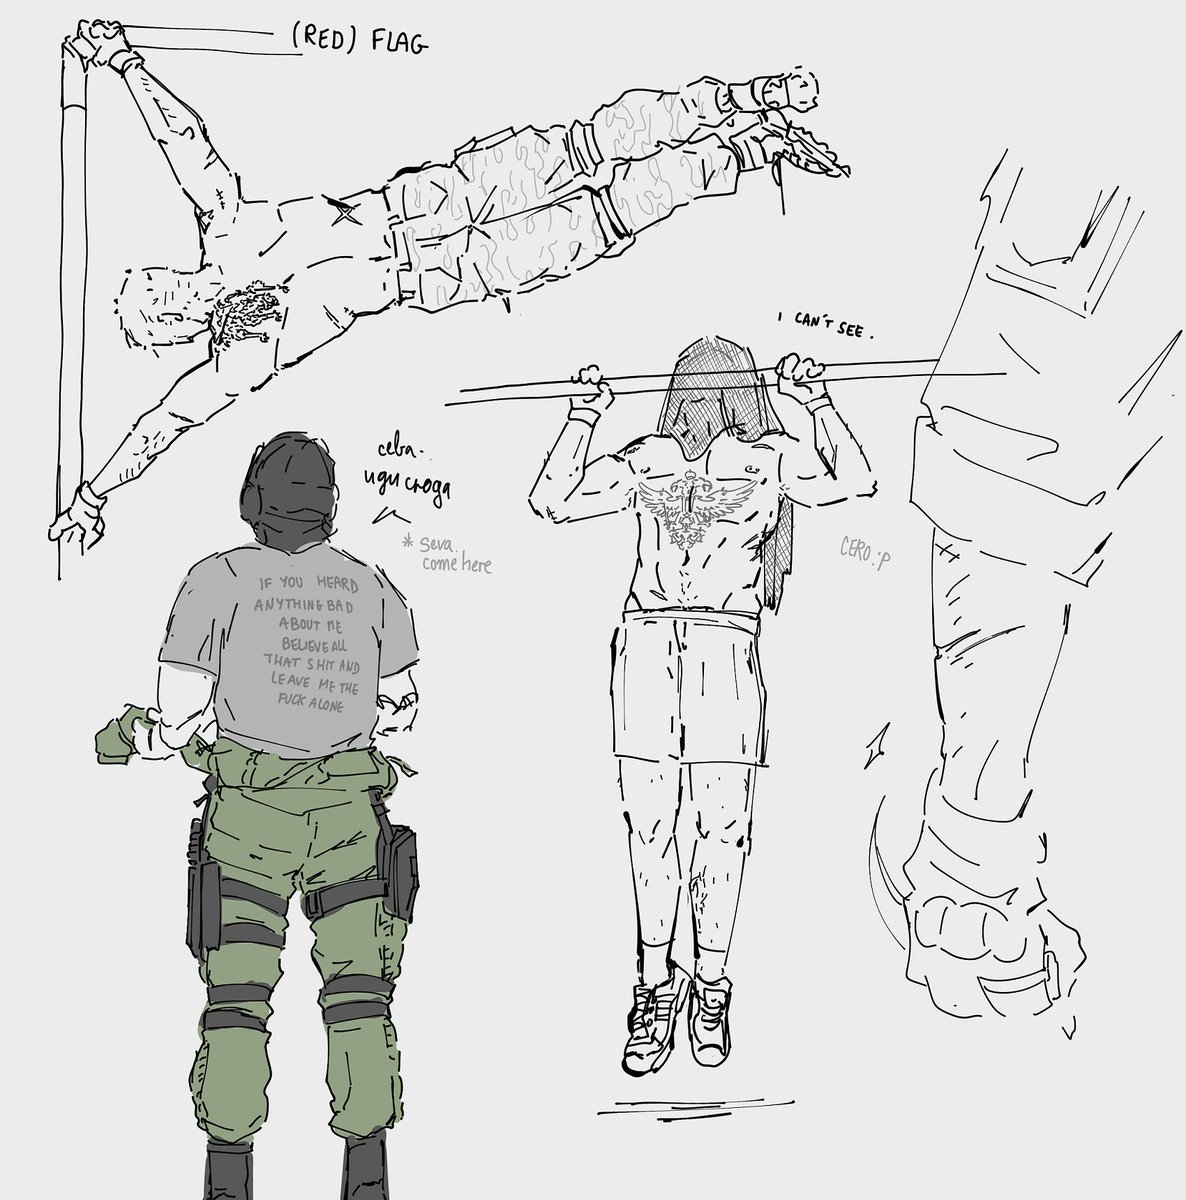 Krueger (+1 nikto) sketches. Krueger's mw19 model is dorito-shaped, I know this man is good at calisthenics. my job here is done